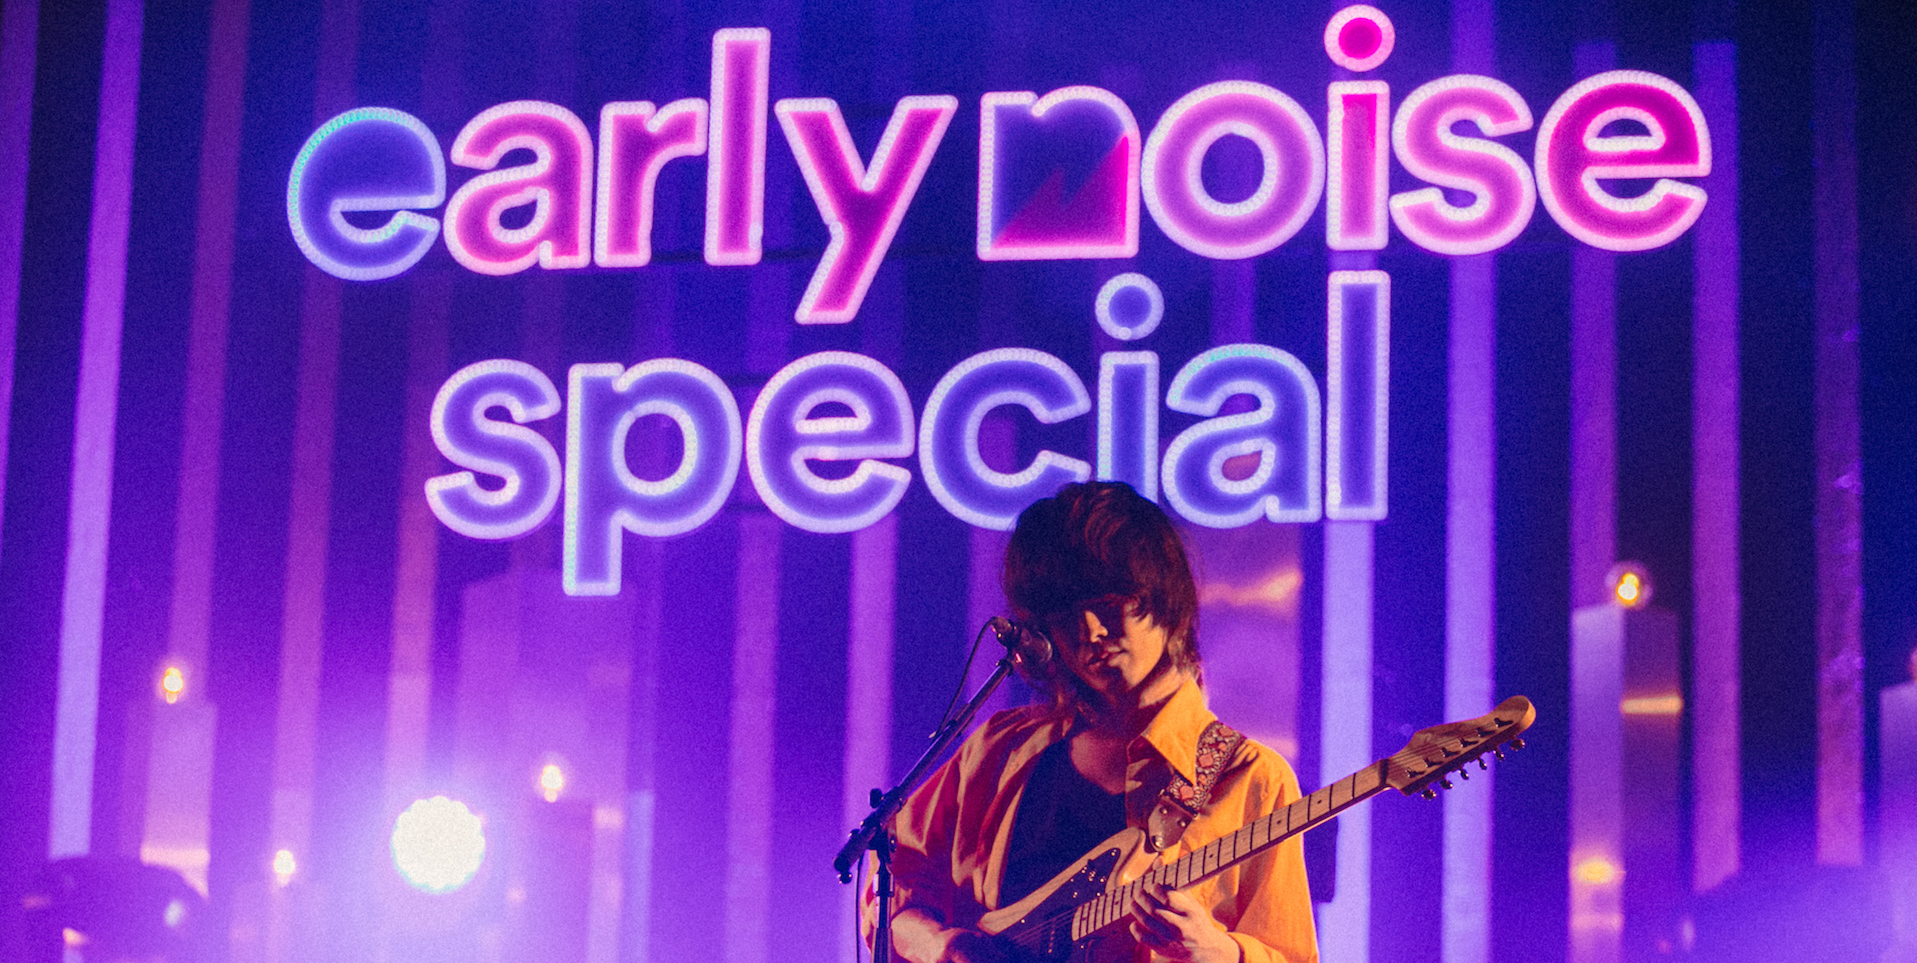 Spotify Celebrates Japan’s Emerging Artists with Early Noise Concert in